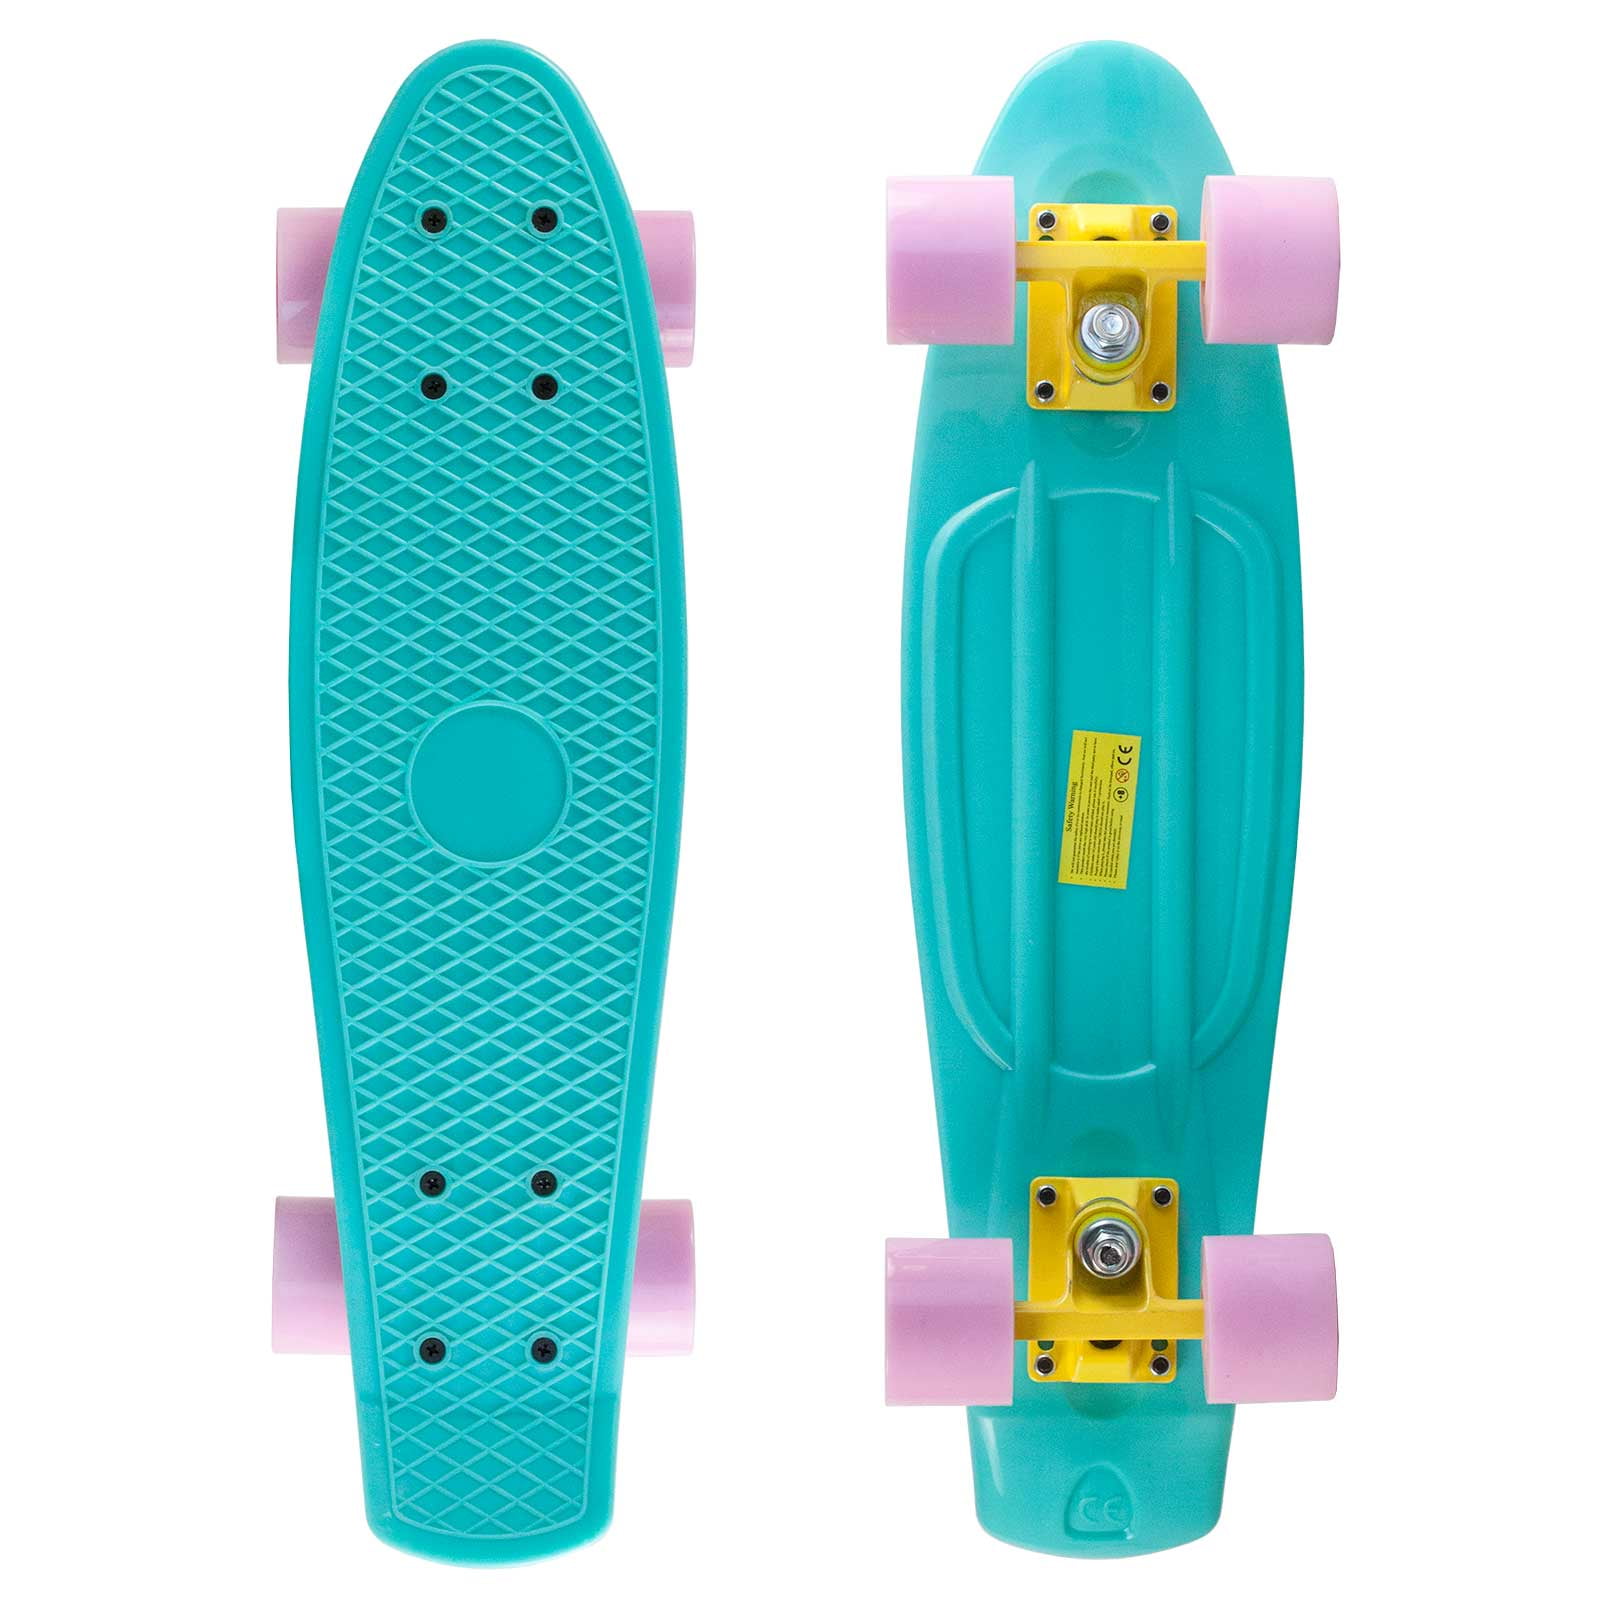 Details about   22 inch Skateboard Mini Cruiser Penny Style Board Plastic Deck for Kids Teens 